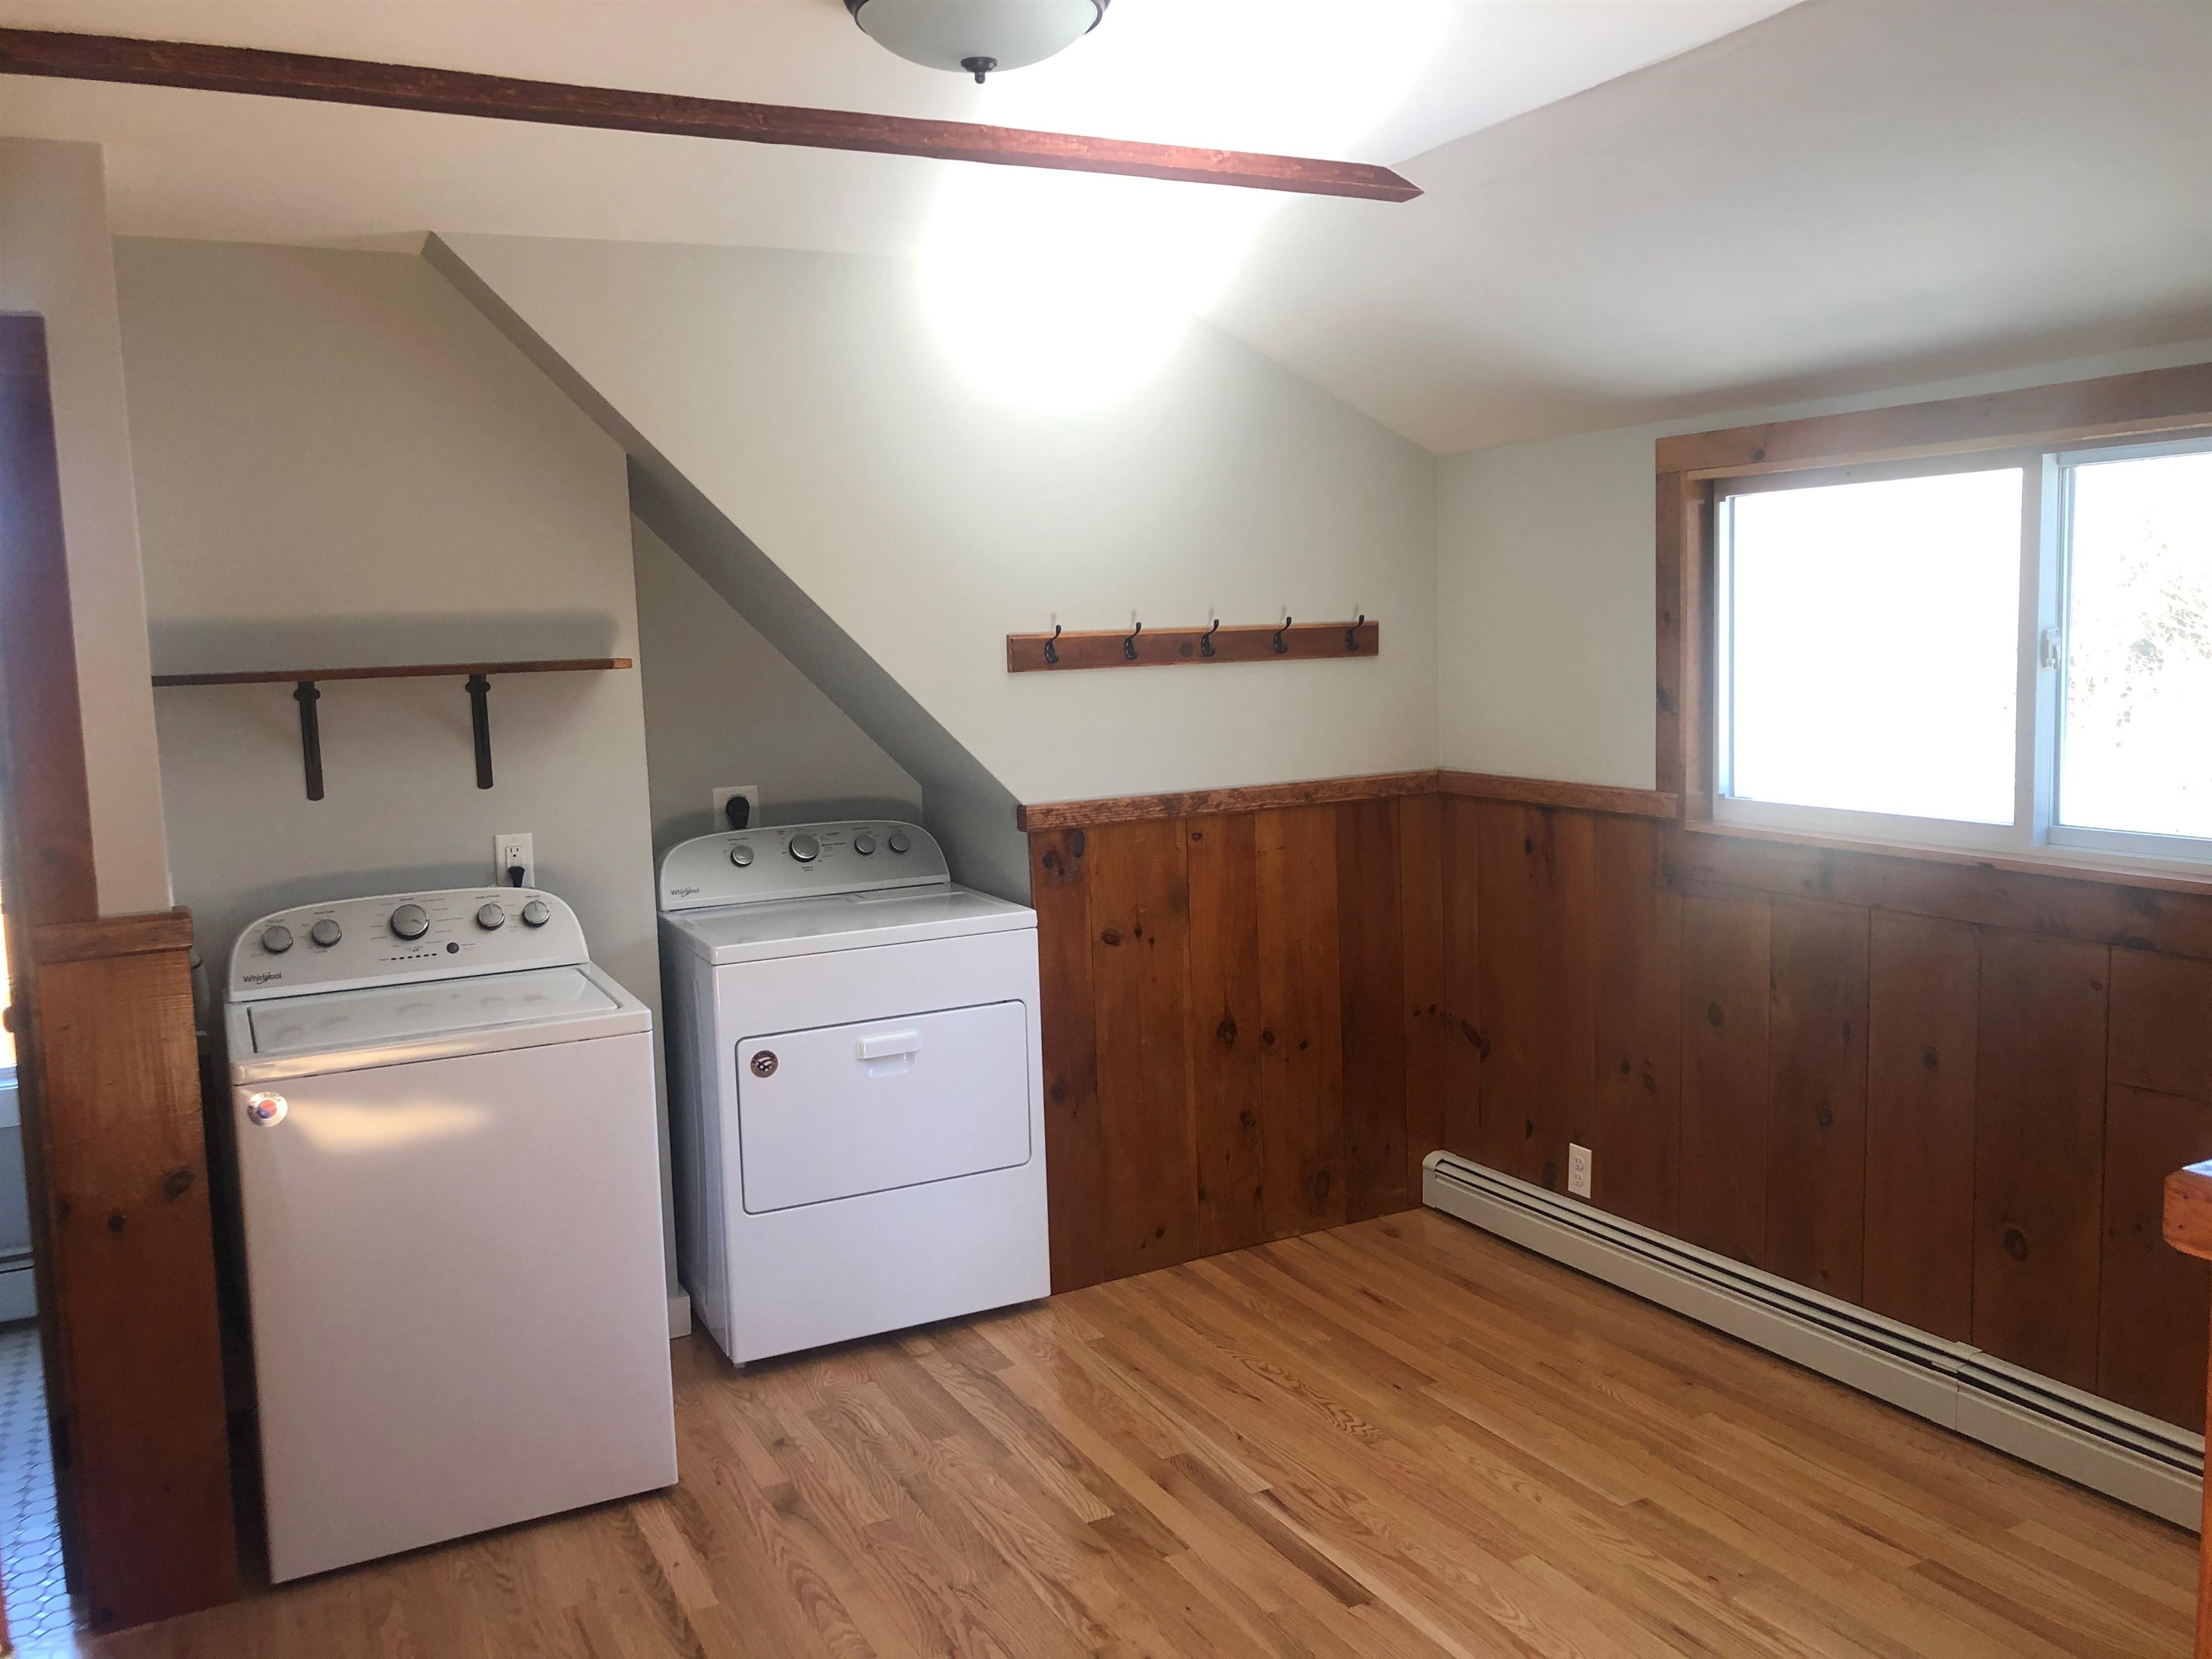 3rd Level Apt with laundry